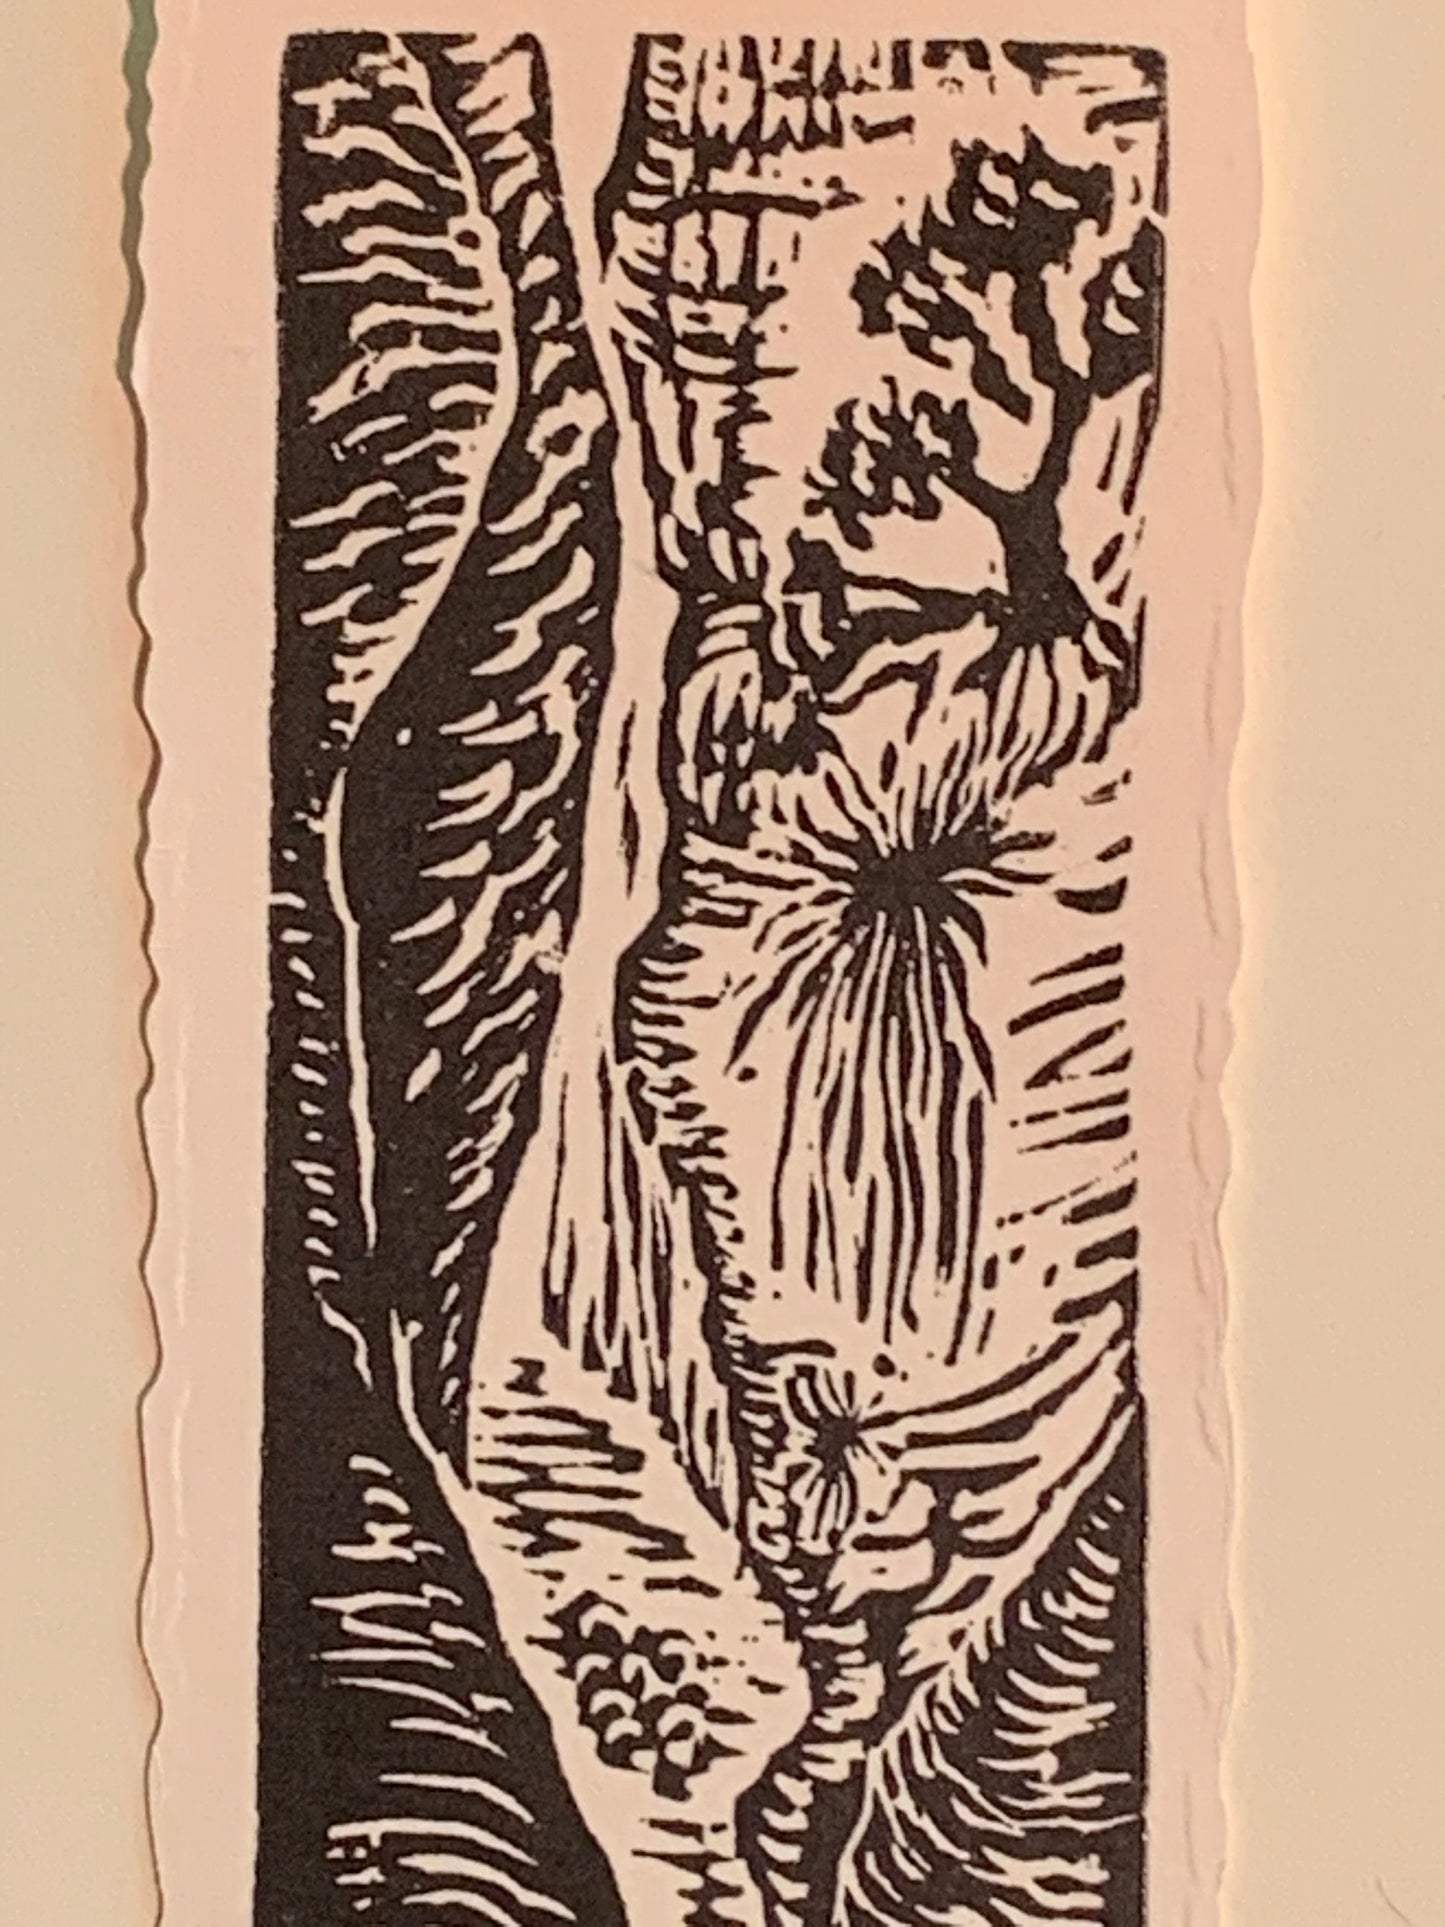 River Through a Narrow Canyon original woodcut small print from Water in the Desert Landscape Collection